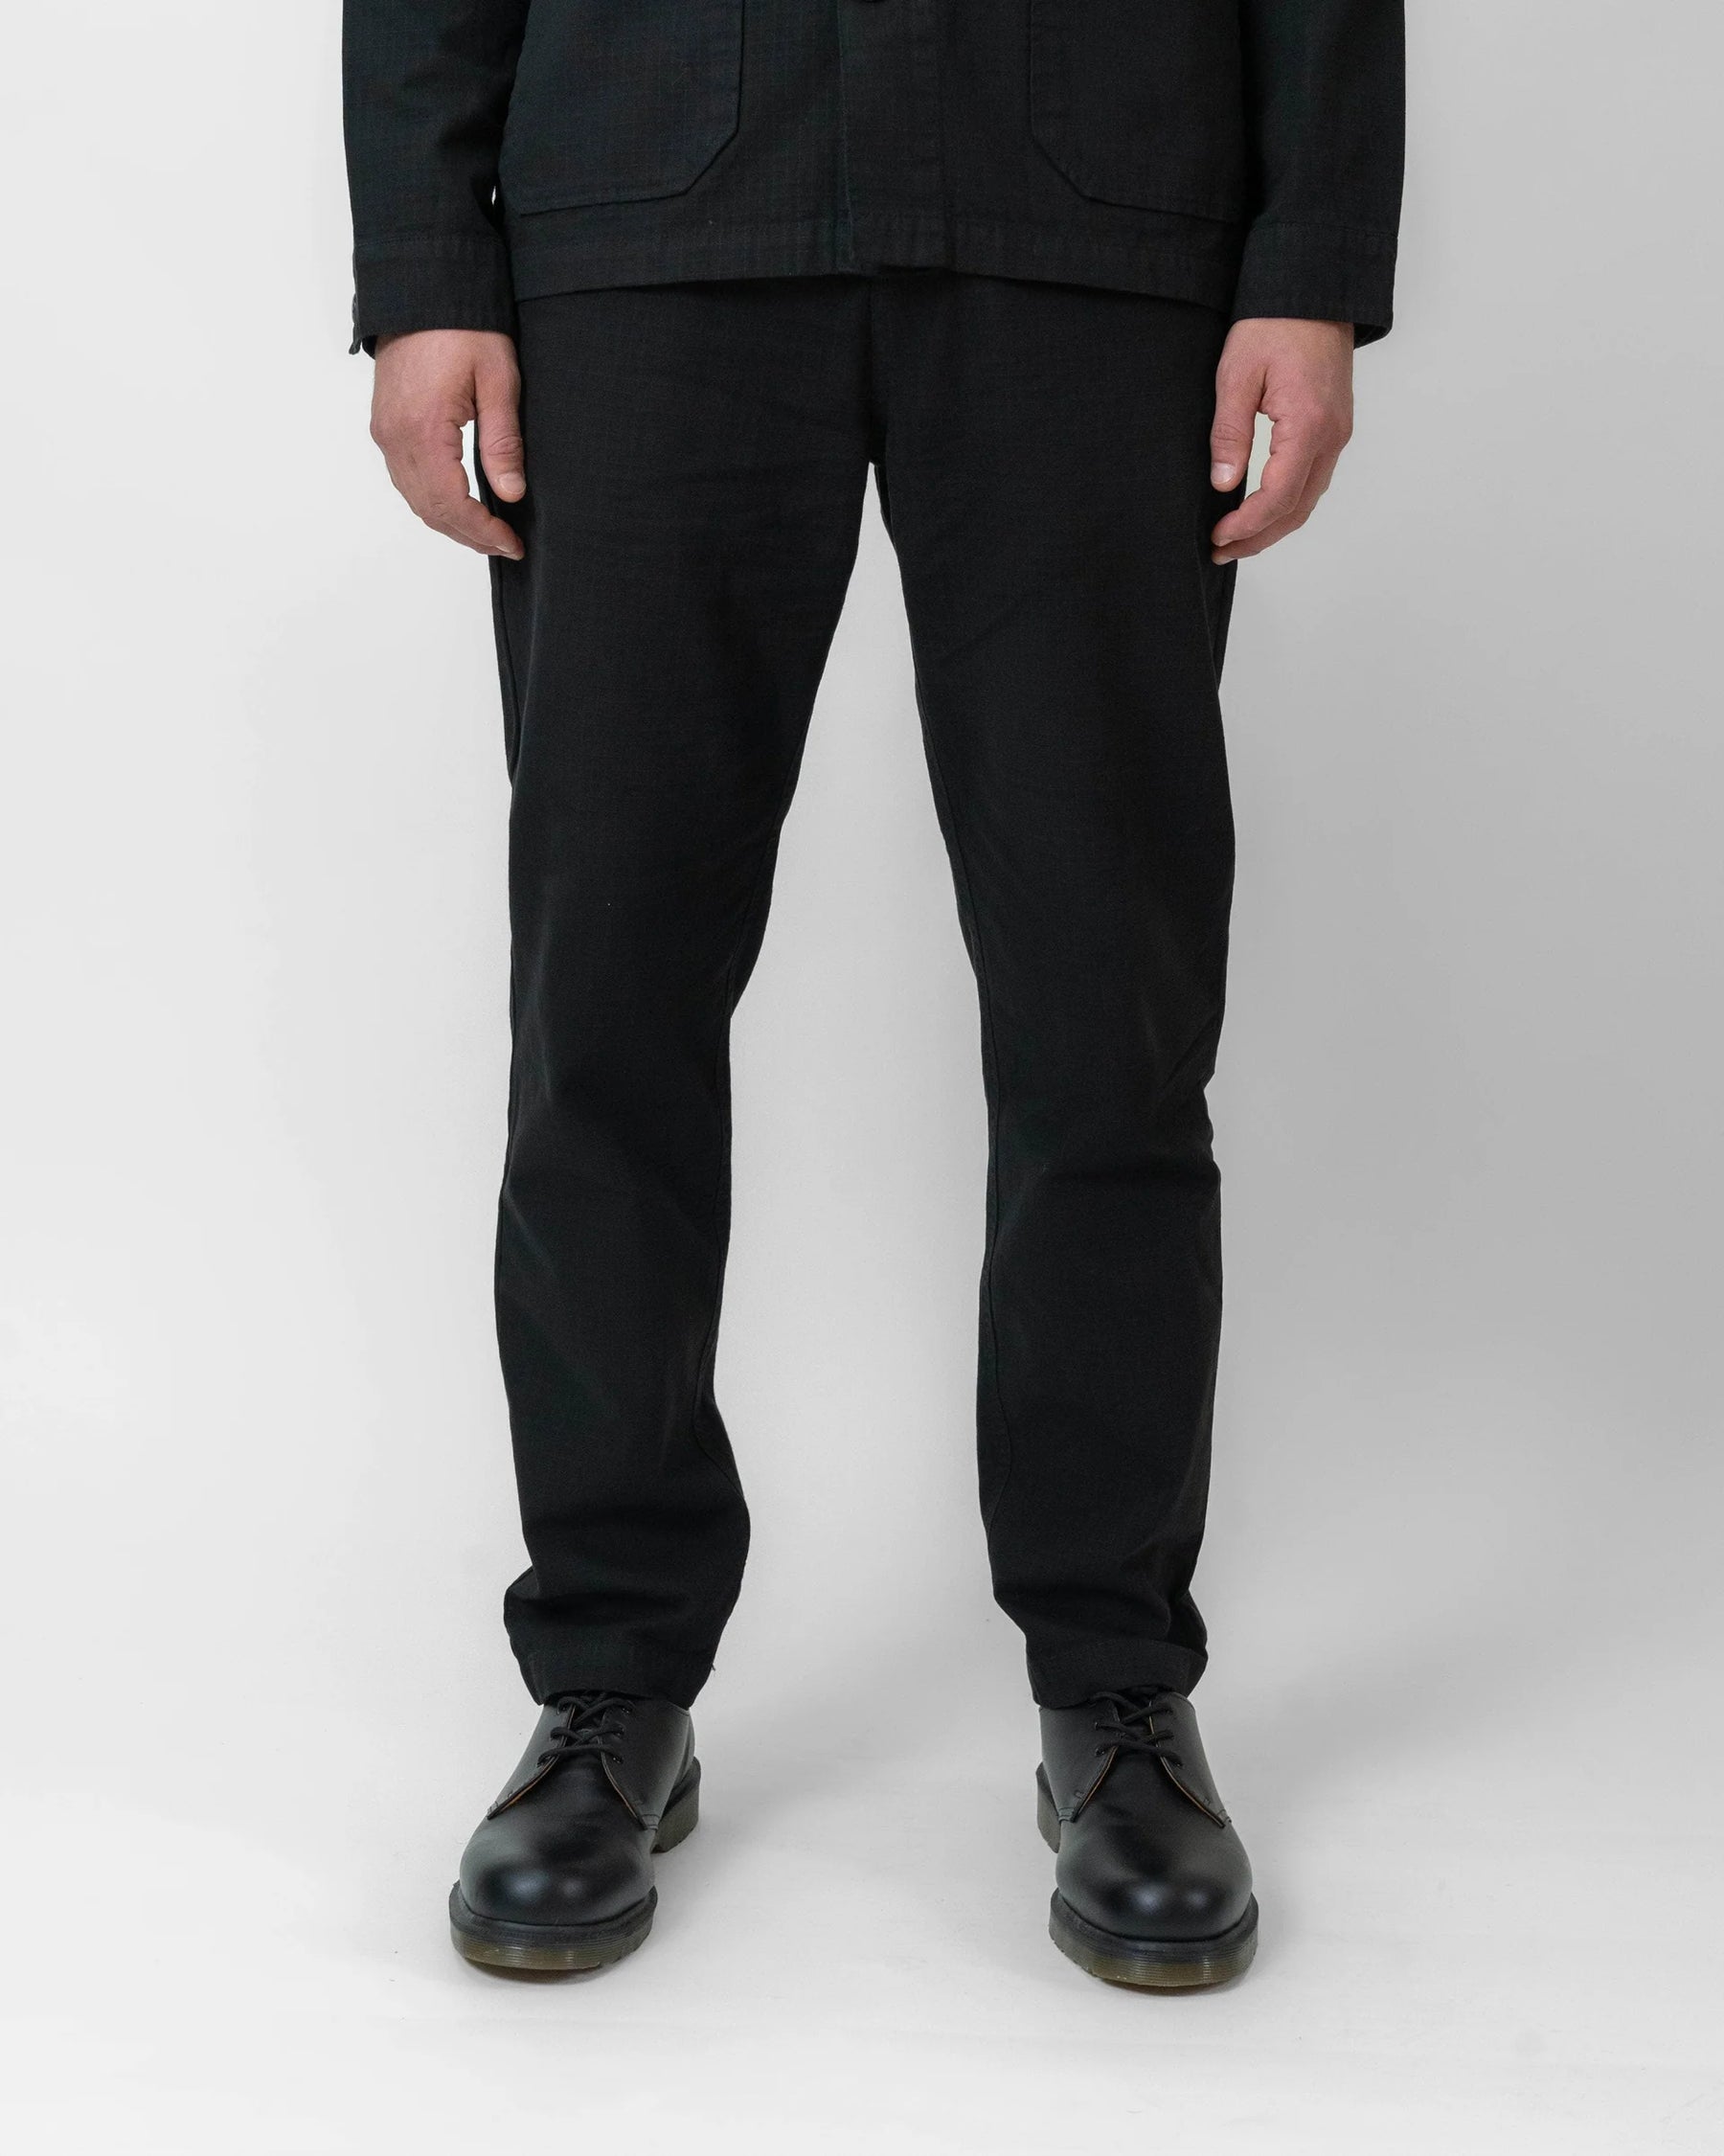 MC Overalls Ripstop Black Relaxed Fit Trousers